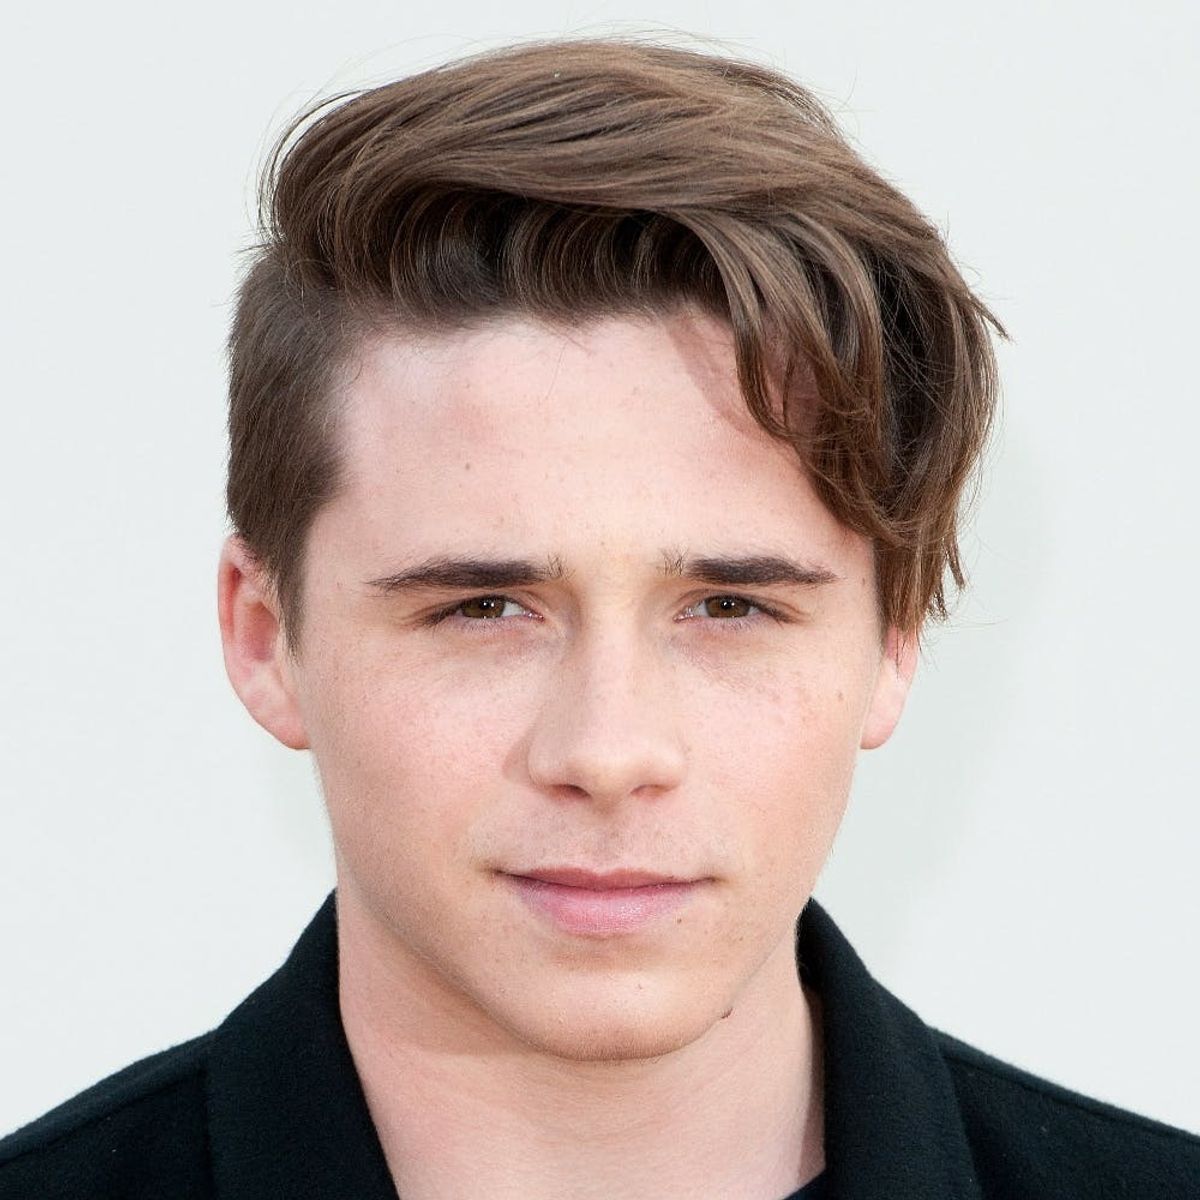 Brooklyn Beckham’s Birthday Message from His Parents Is Super Sweet